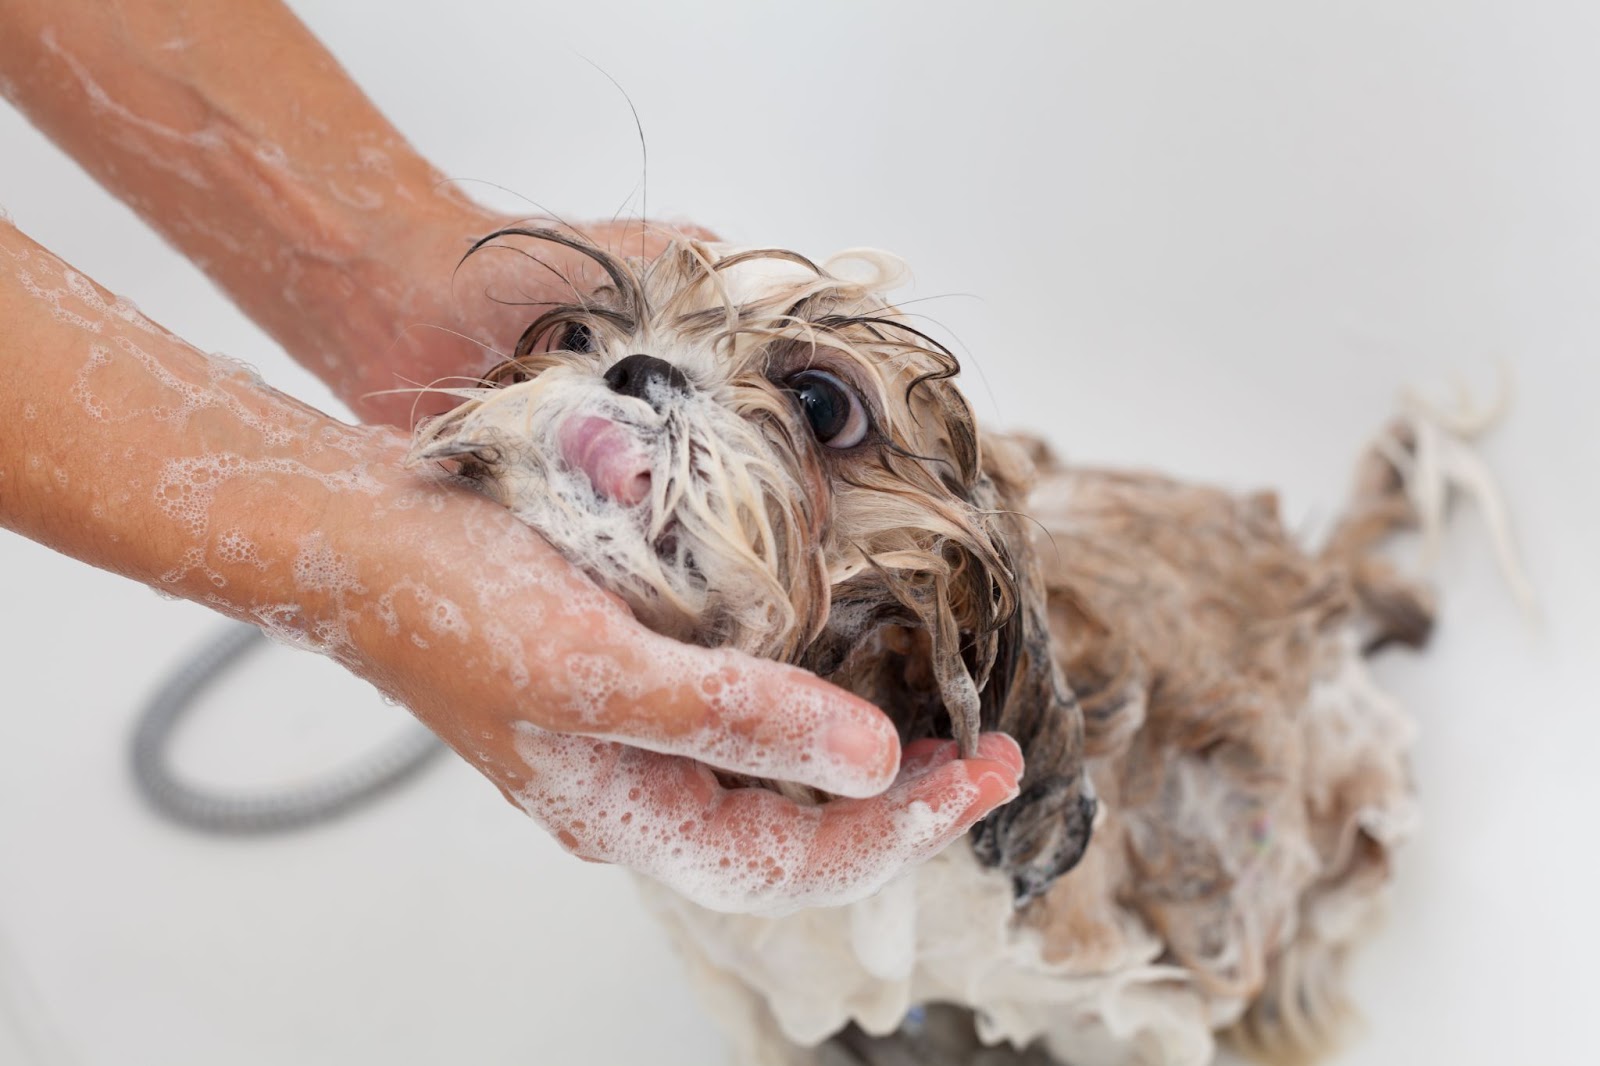 Dog taking a bath, covered in soap